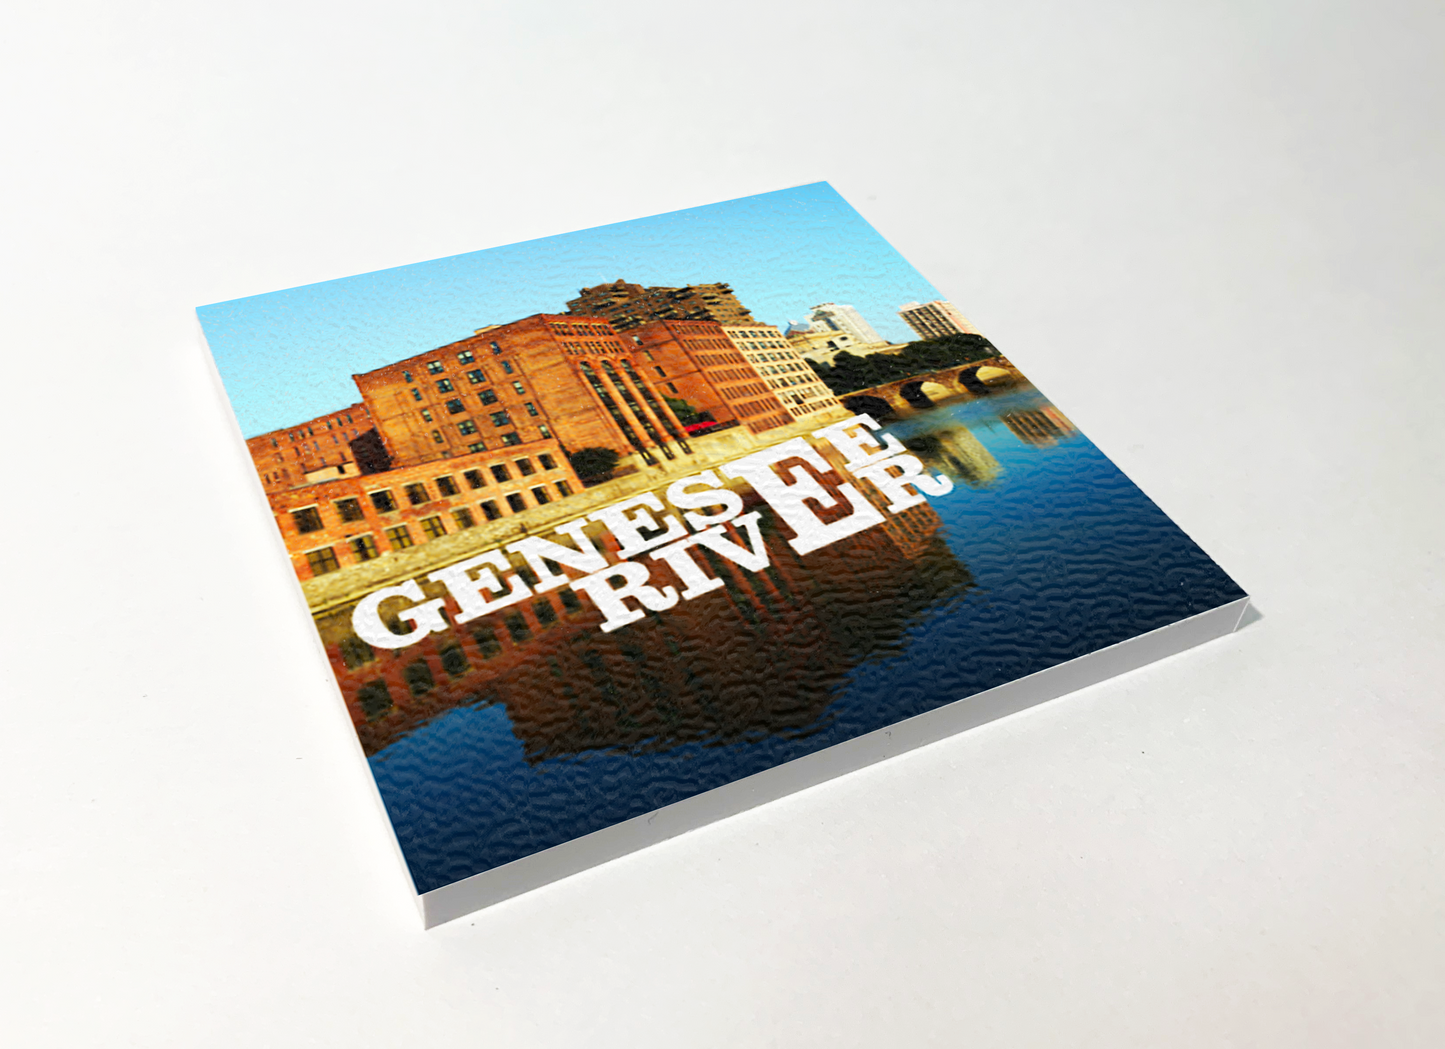 Genesee River Rochester ABS Plastic Coaster 4 Pack Designed and Handcrafted in Buffalo NY